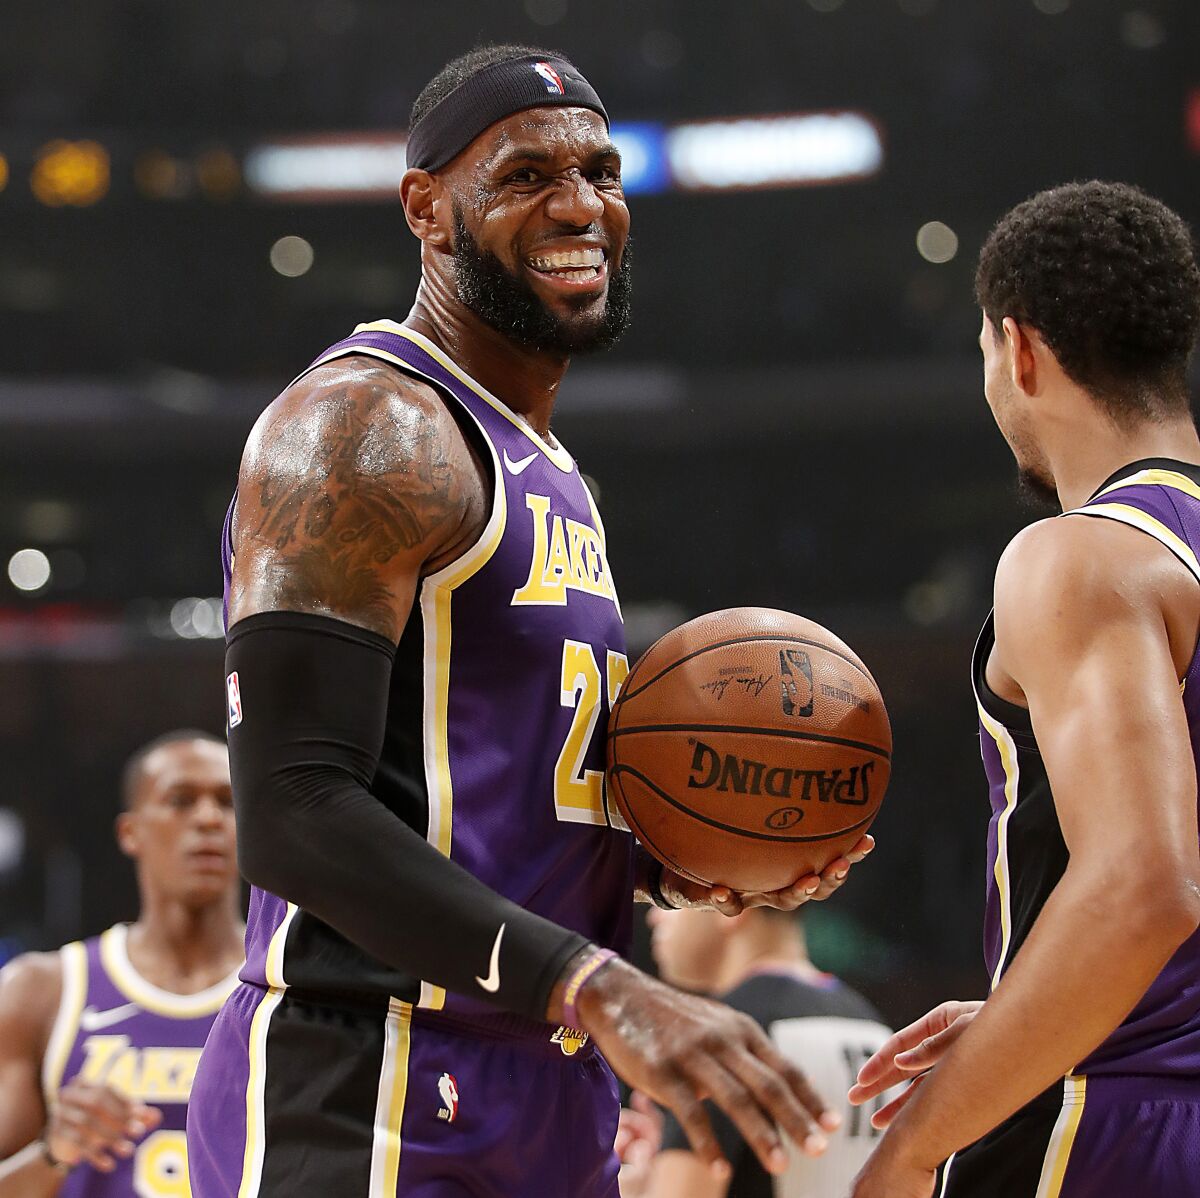 Lakers forward LeBron James celebrates a basket against the Timberwolves by teammate Josh Hart.